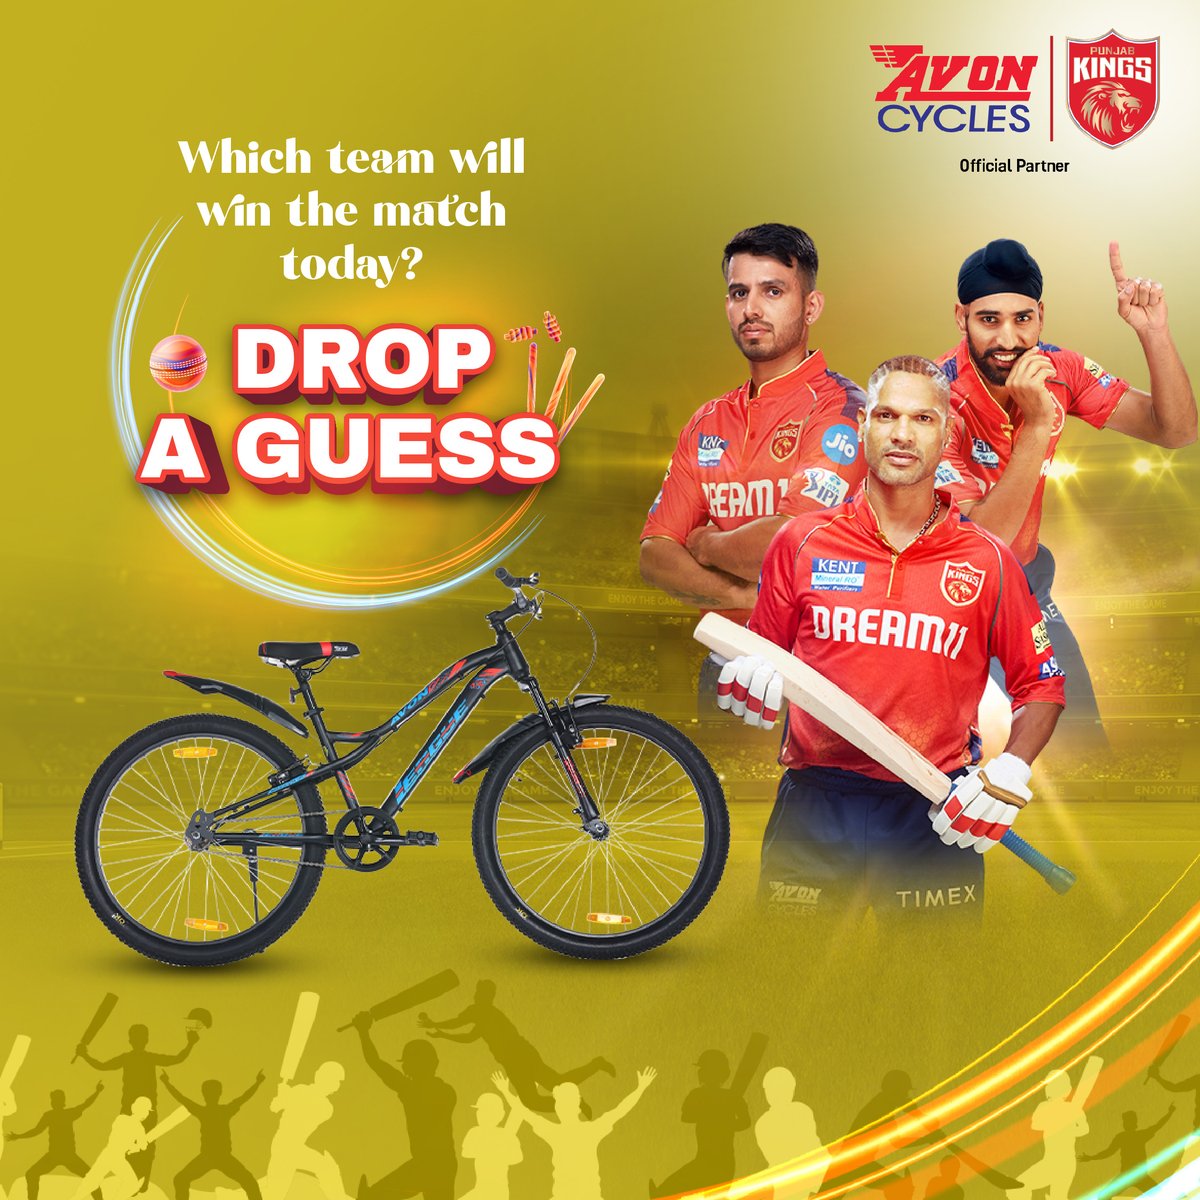 Share your guesses in the comments below for a chance to win exciting surprises 😍 #Avon #AvonCycles #KingsRideWithAvon #kings11punjab #SaddaPunjab #PBKS #T20Match #jazbahaipunjabi❣️💫